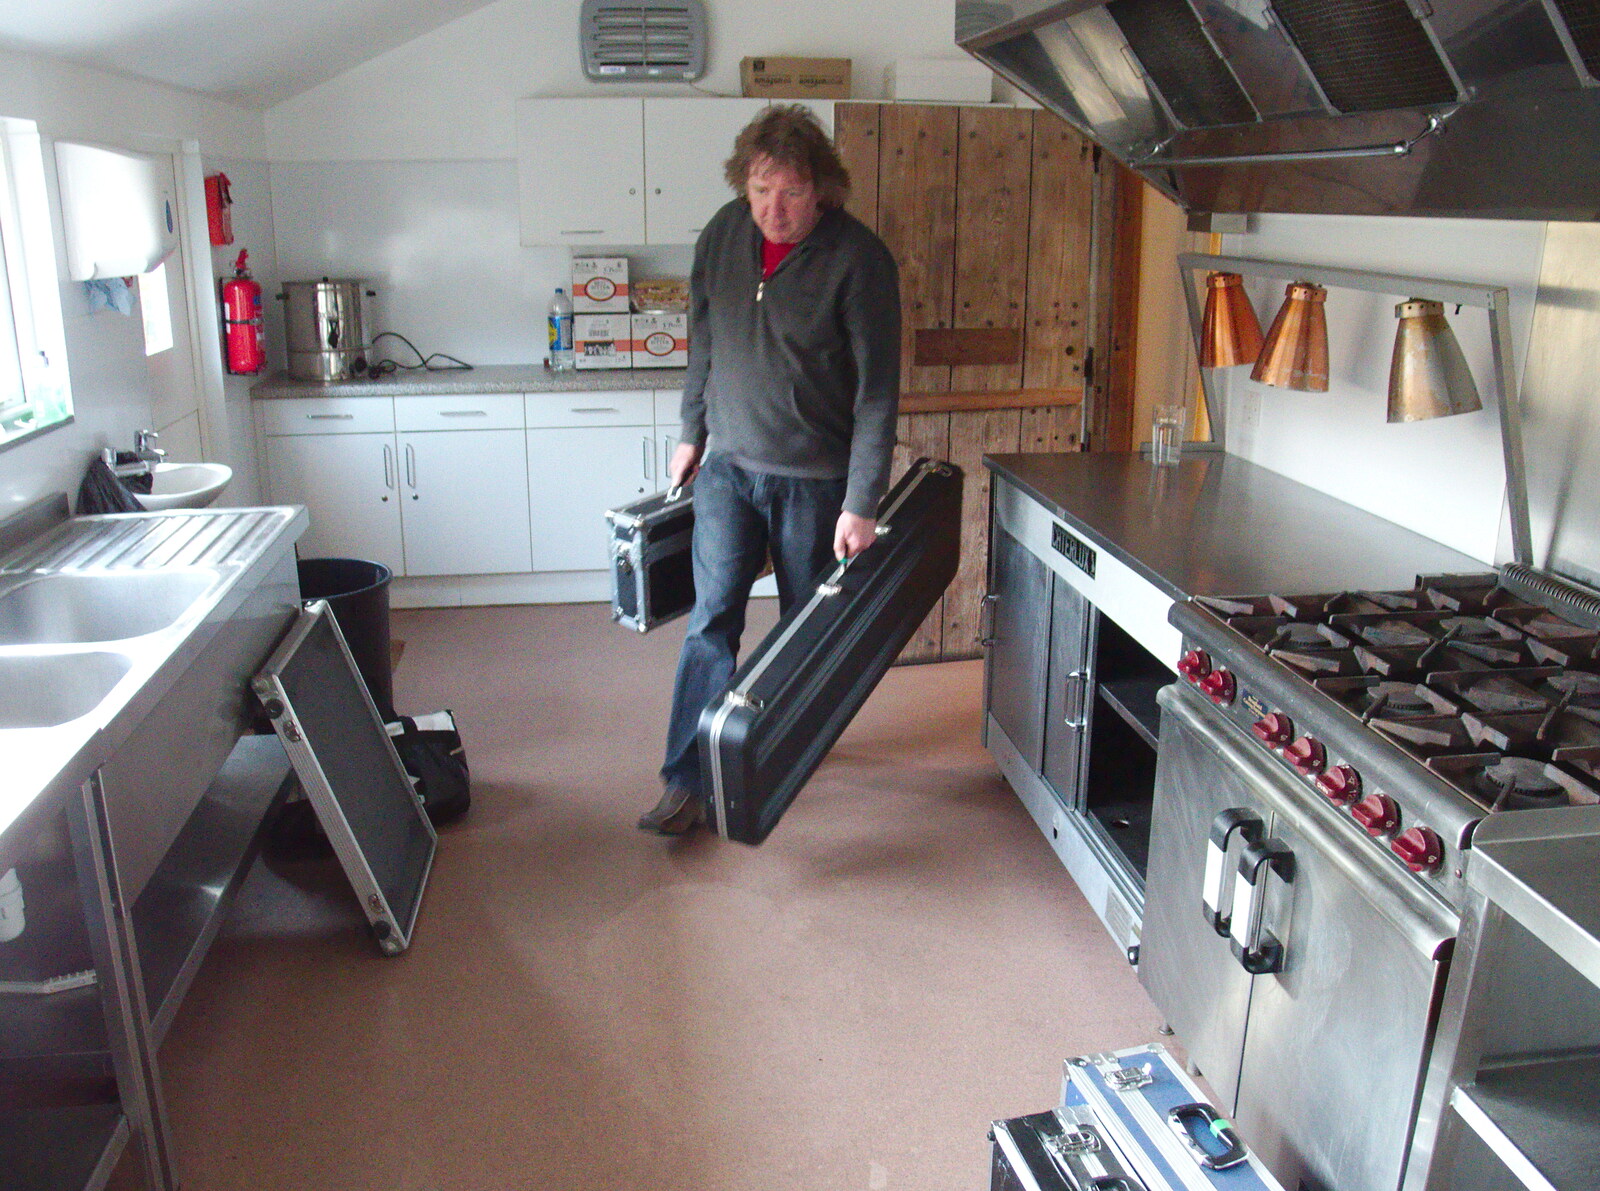 Max hauls his cases through the kitchen from The BBs Play Haughley Park Barn, Haughley, Suffolk - 26th April 2014